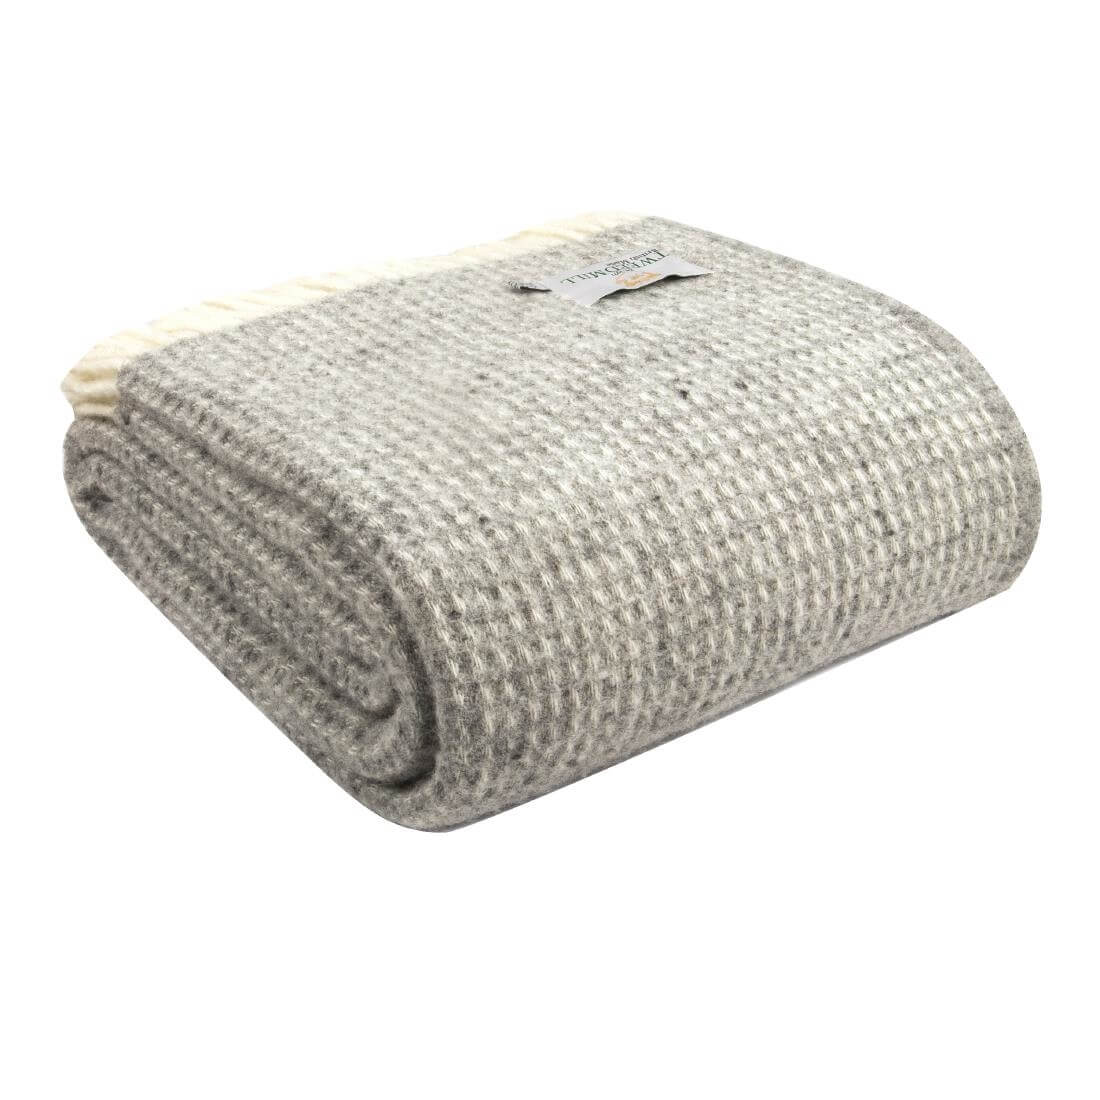 Image of Cwtch Throw Pure New Wool Grey made in the UK by Mitre Linen. Buying this product supports a UK business, jobs and the local community